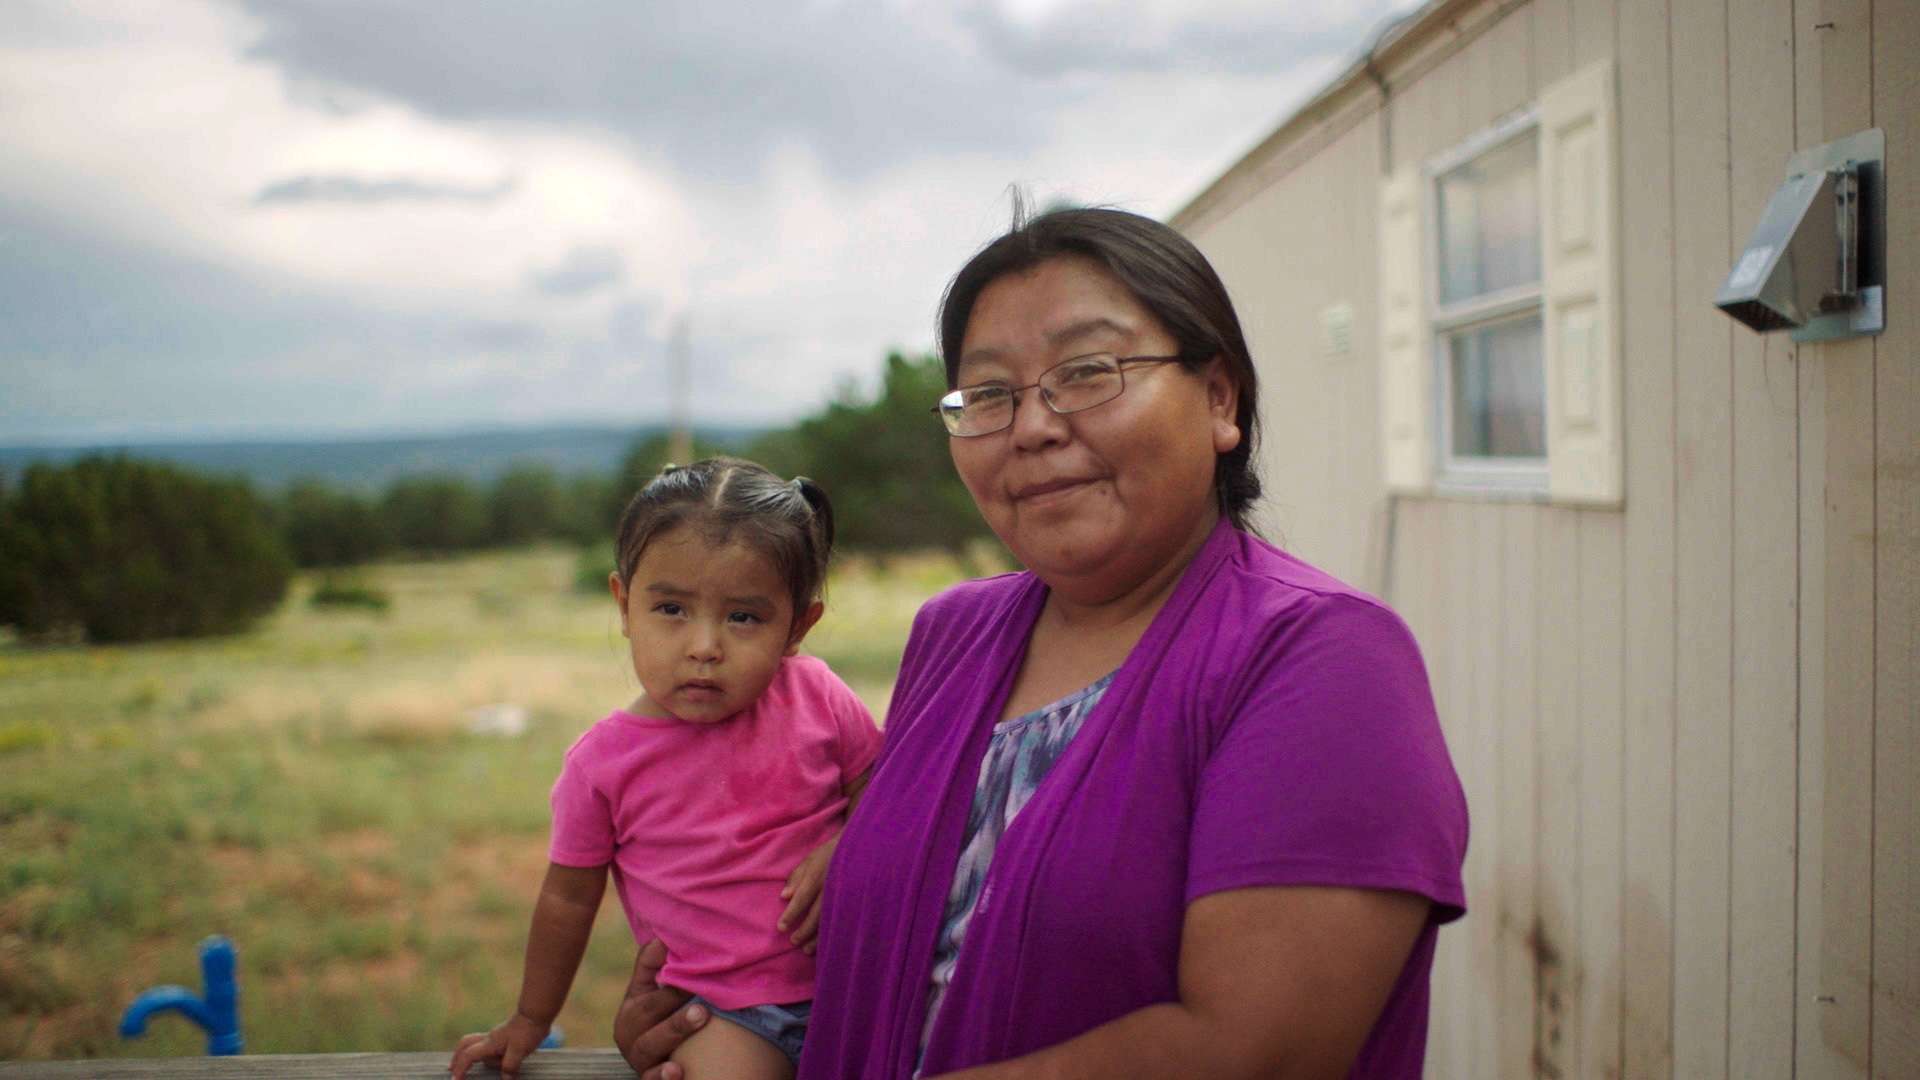 A Native American woman holding a child in her arm looks at the camera.